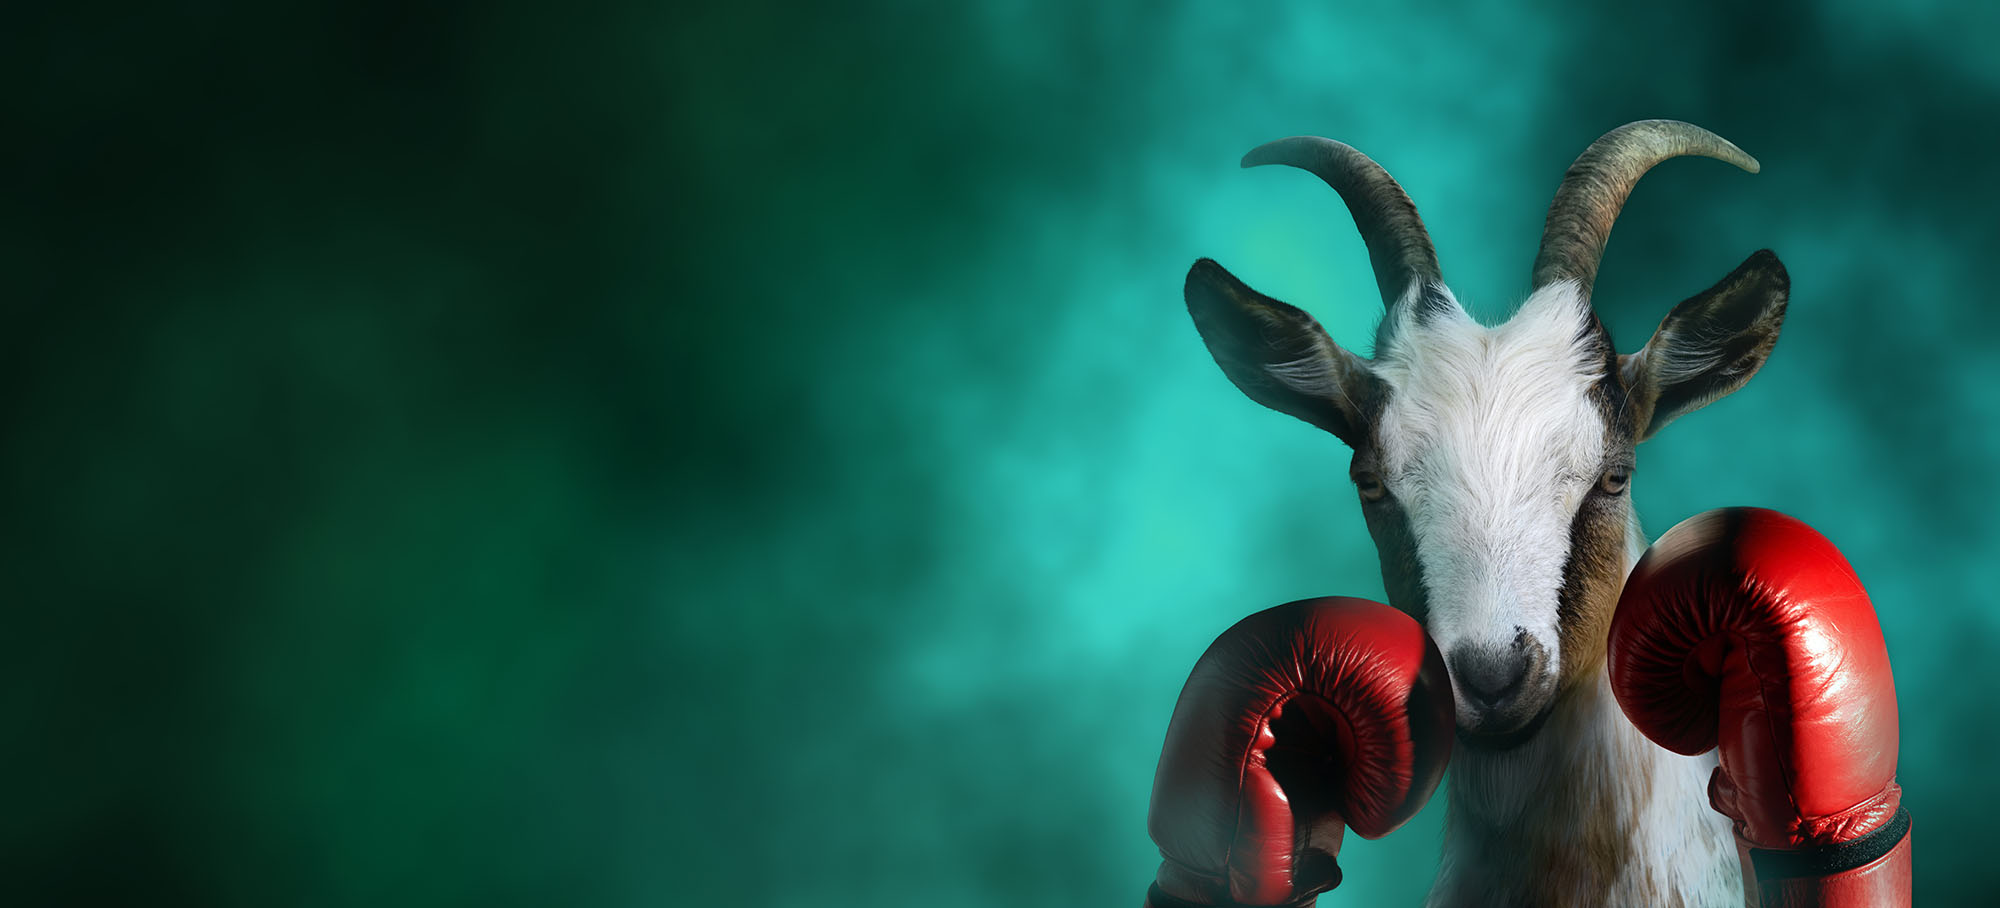 Goat With Boxing Gloves - funstarts33